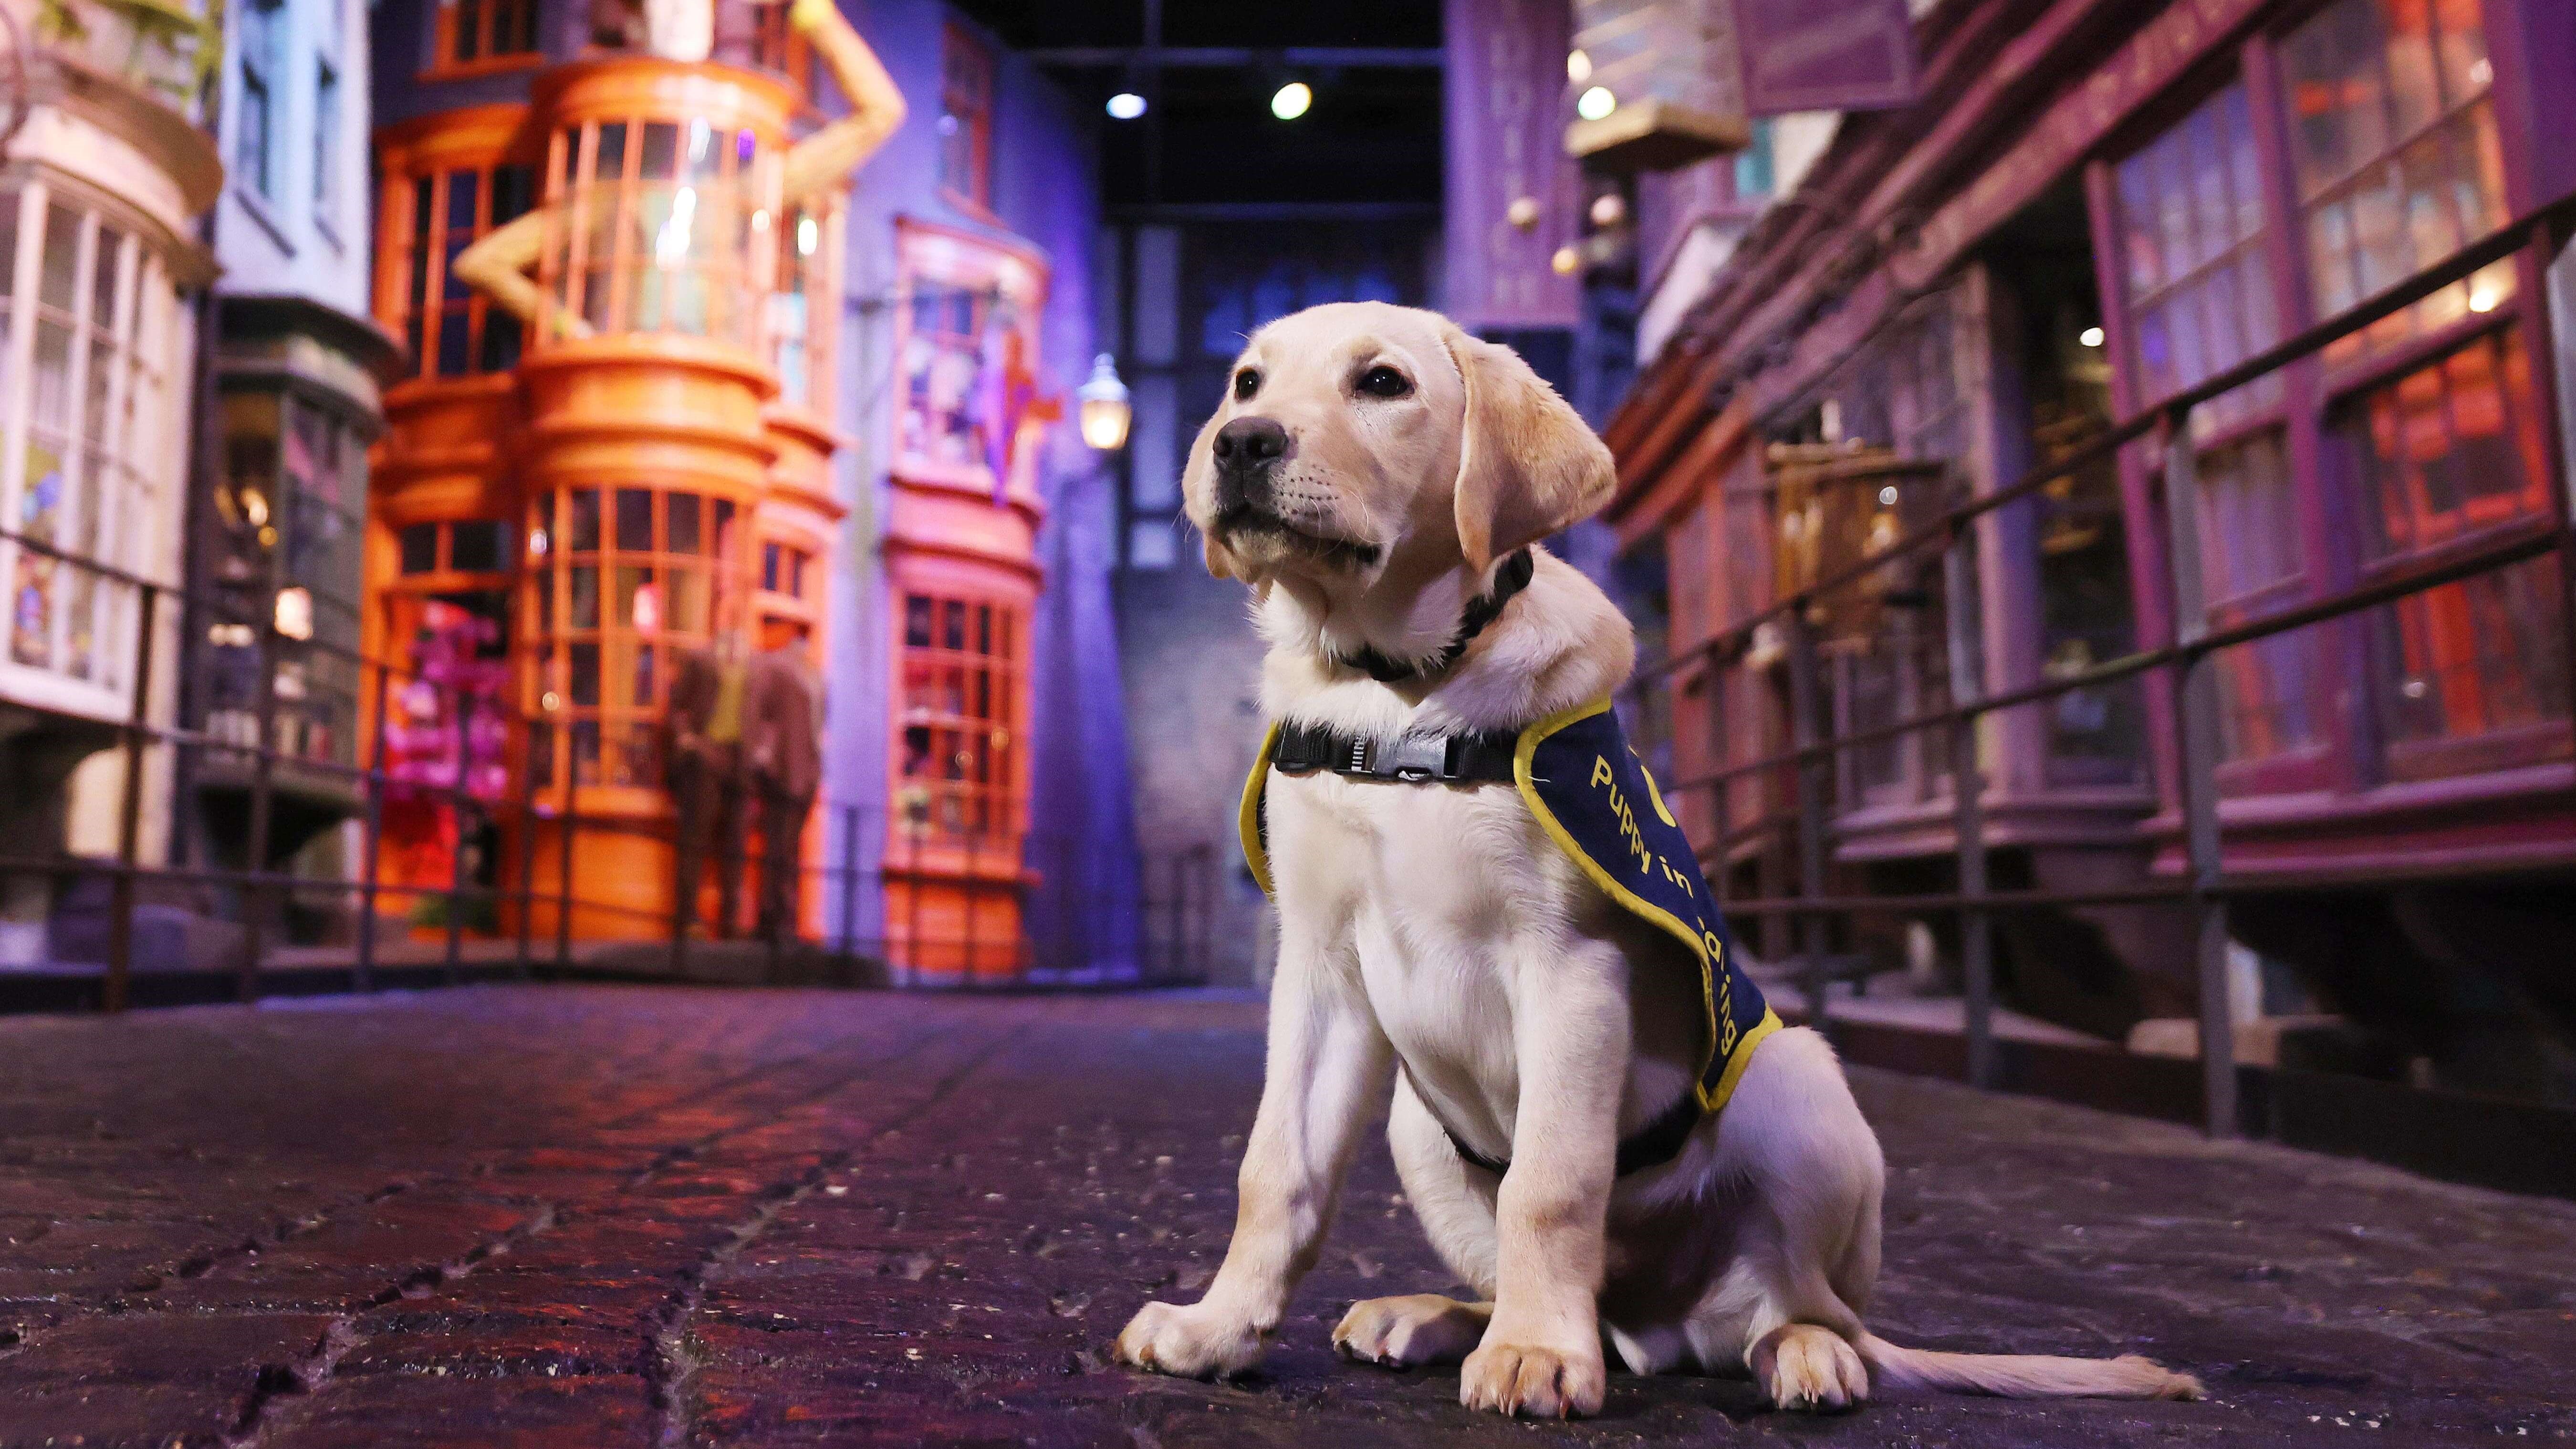 14-week-old yellow Labrador puppy Ron sits on Diagon Alley's cobblestones with colourful shops in the background